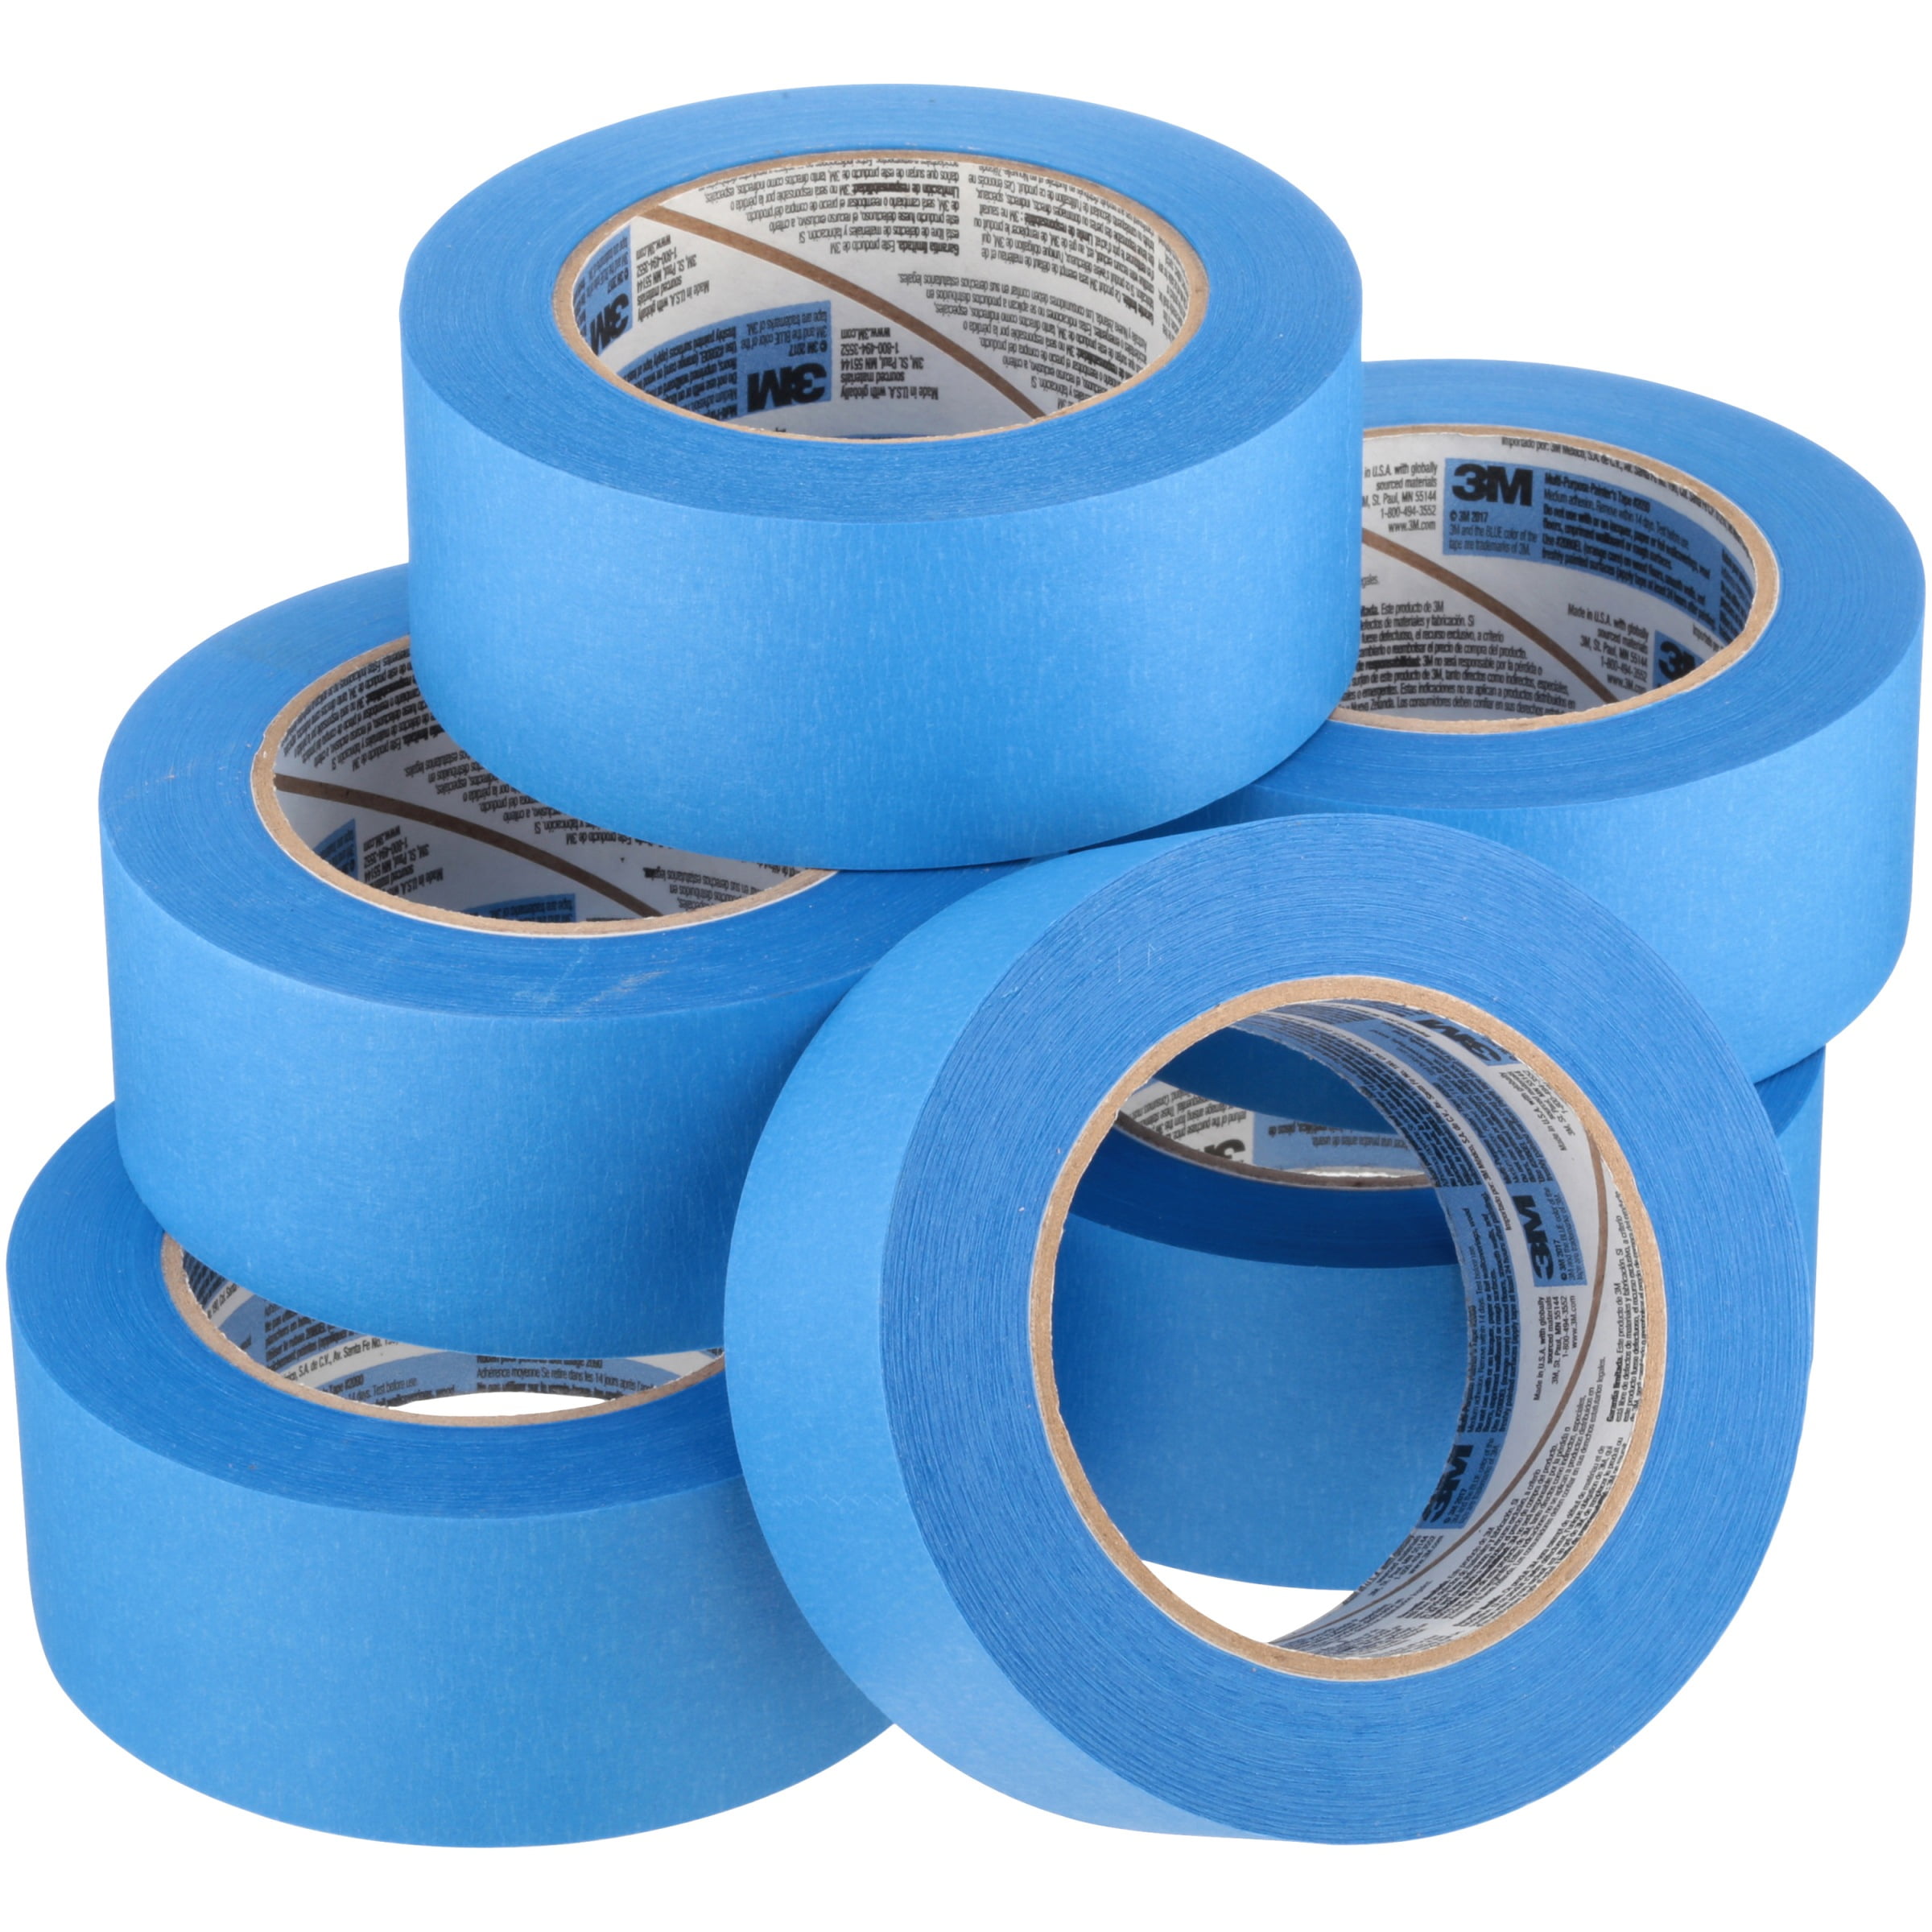 Wide Blue Painters Tape, 6 inch x 60 yds, Made in Comoros